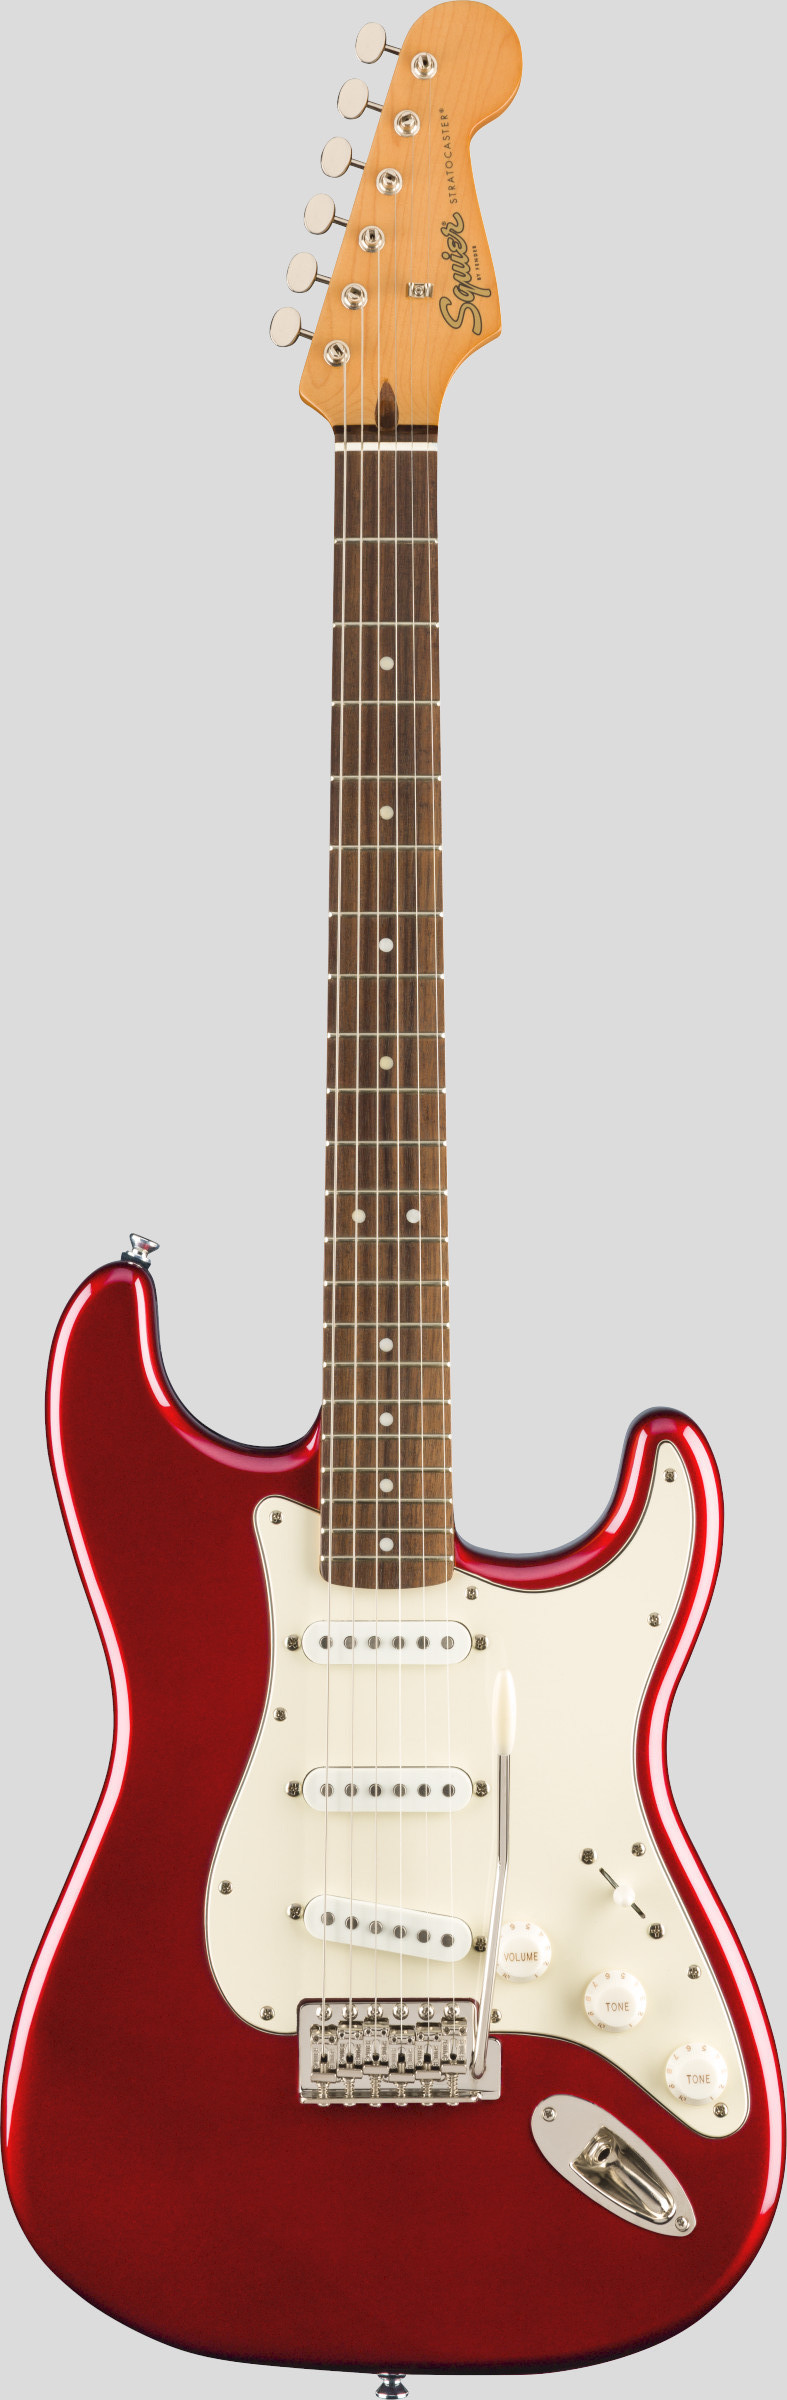 Squier by Fender Classic Vibe 60 Stratocaster Candy Apple Red 1